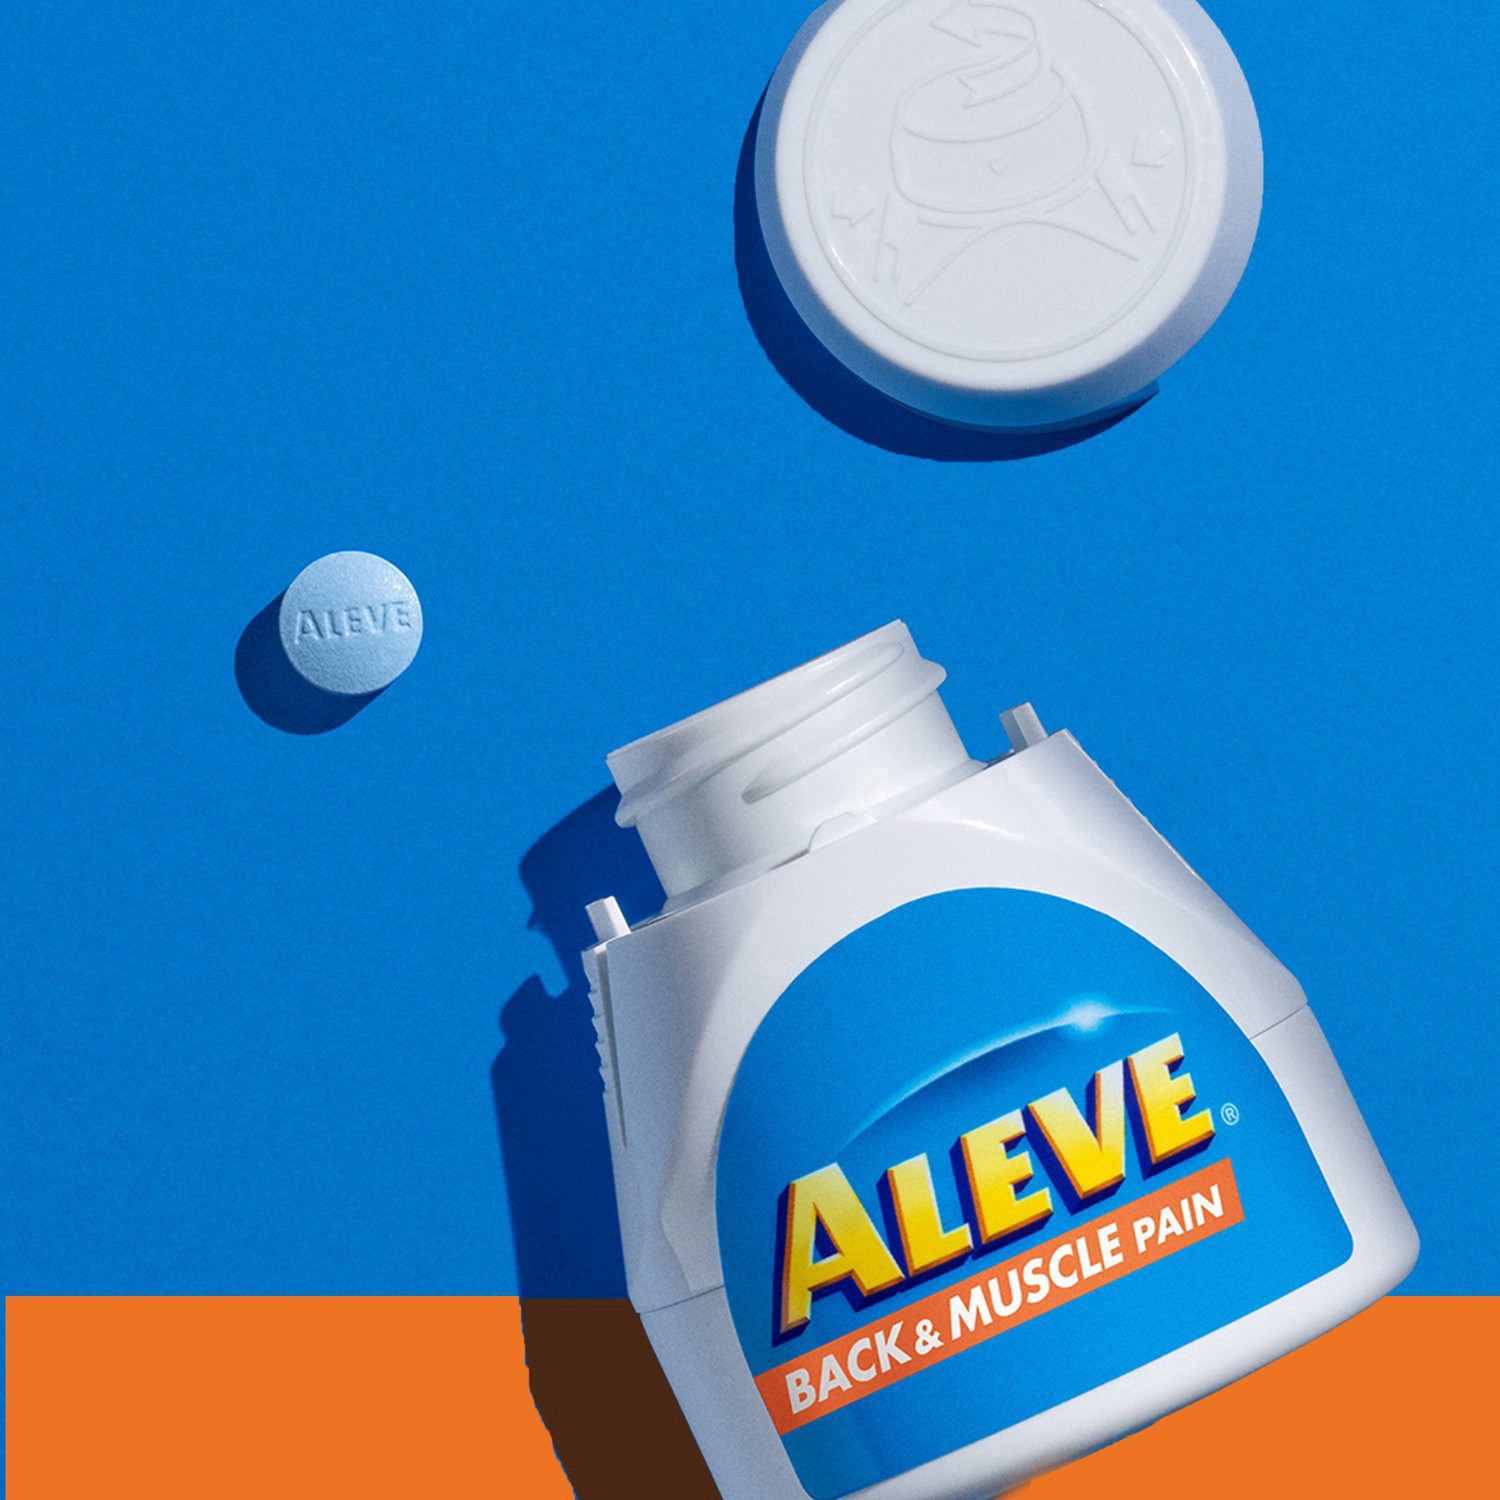 slide 10 of 73, Aleve Back & Muscle Pain Relief Naproxen Sodium Tablets, 50 ct